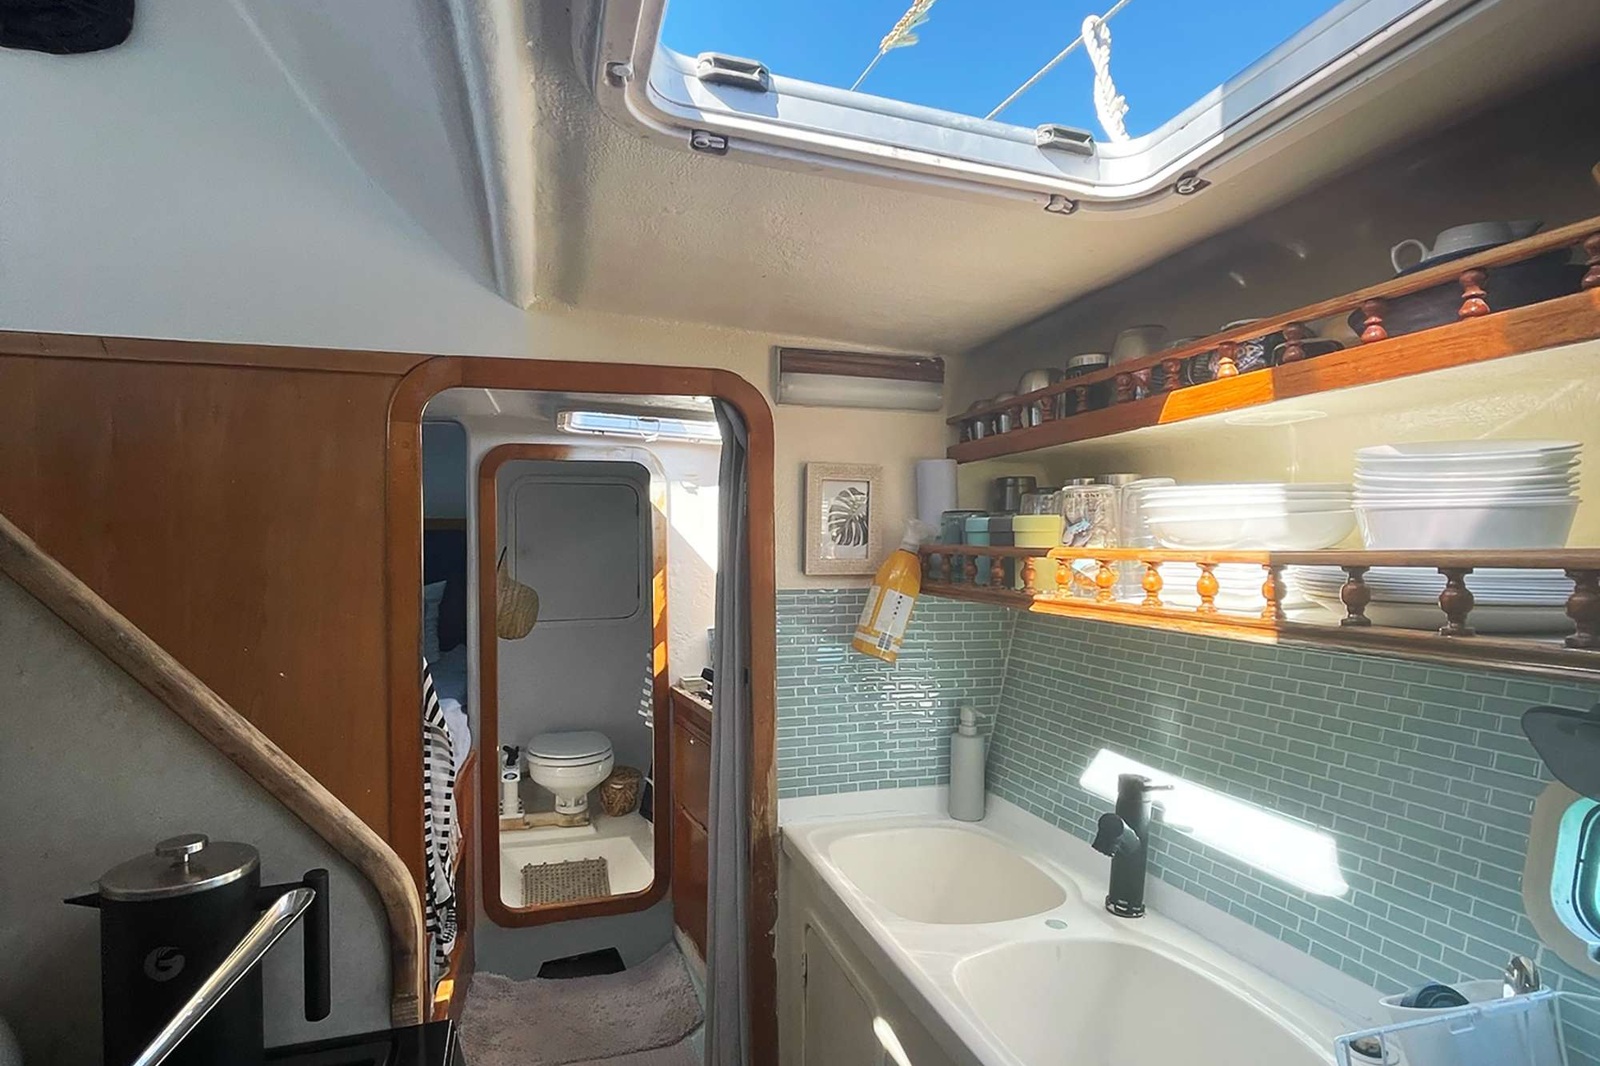 Galley wih double sinks with the sun shining through!